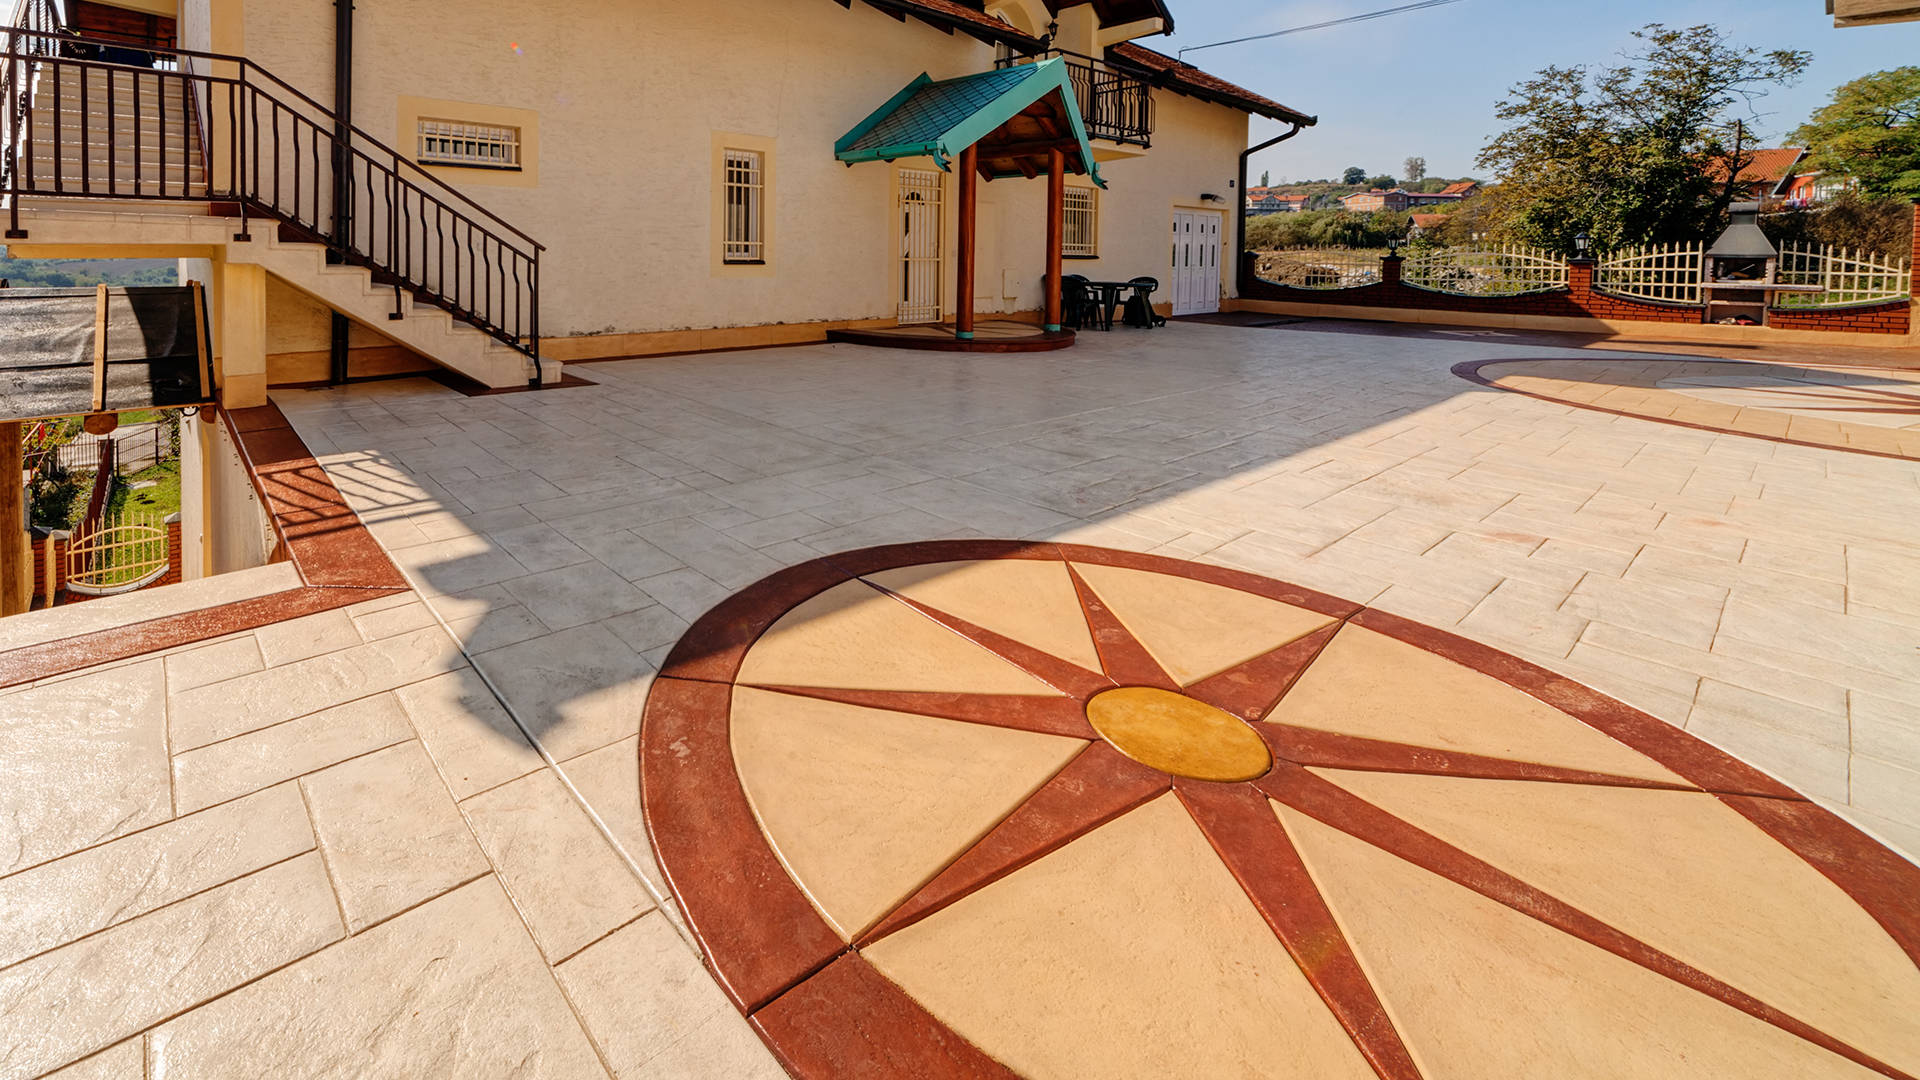 imprinted pavement with compass rose mold